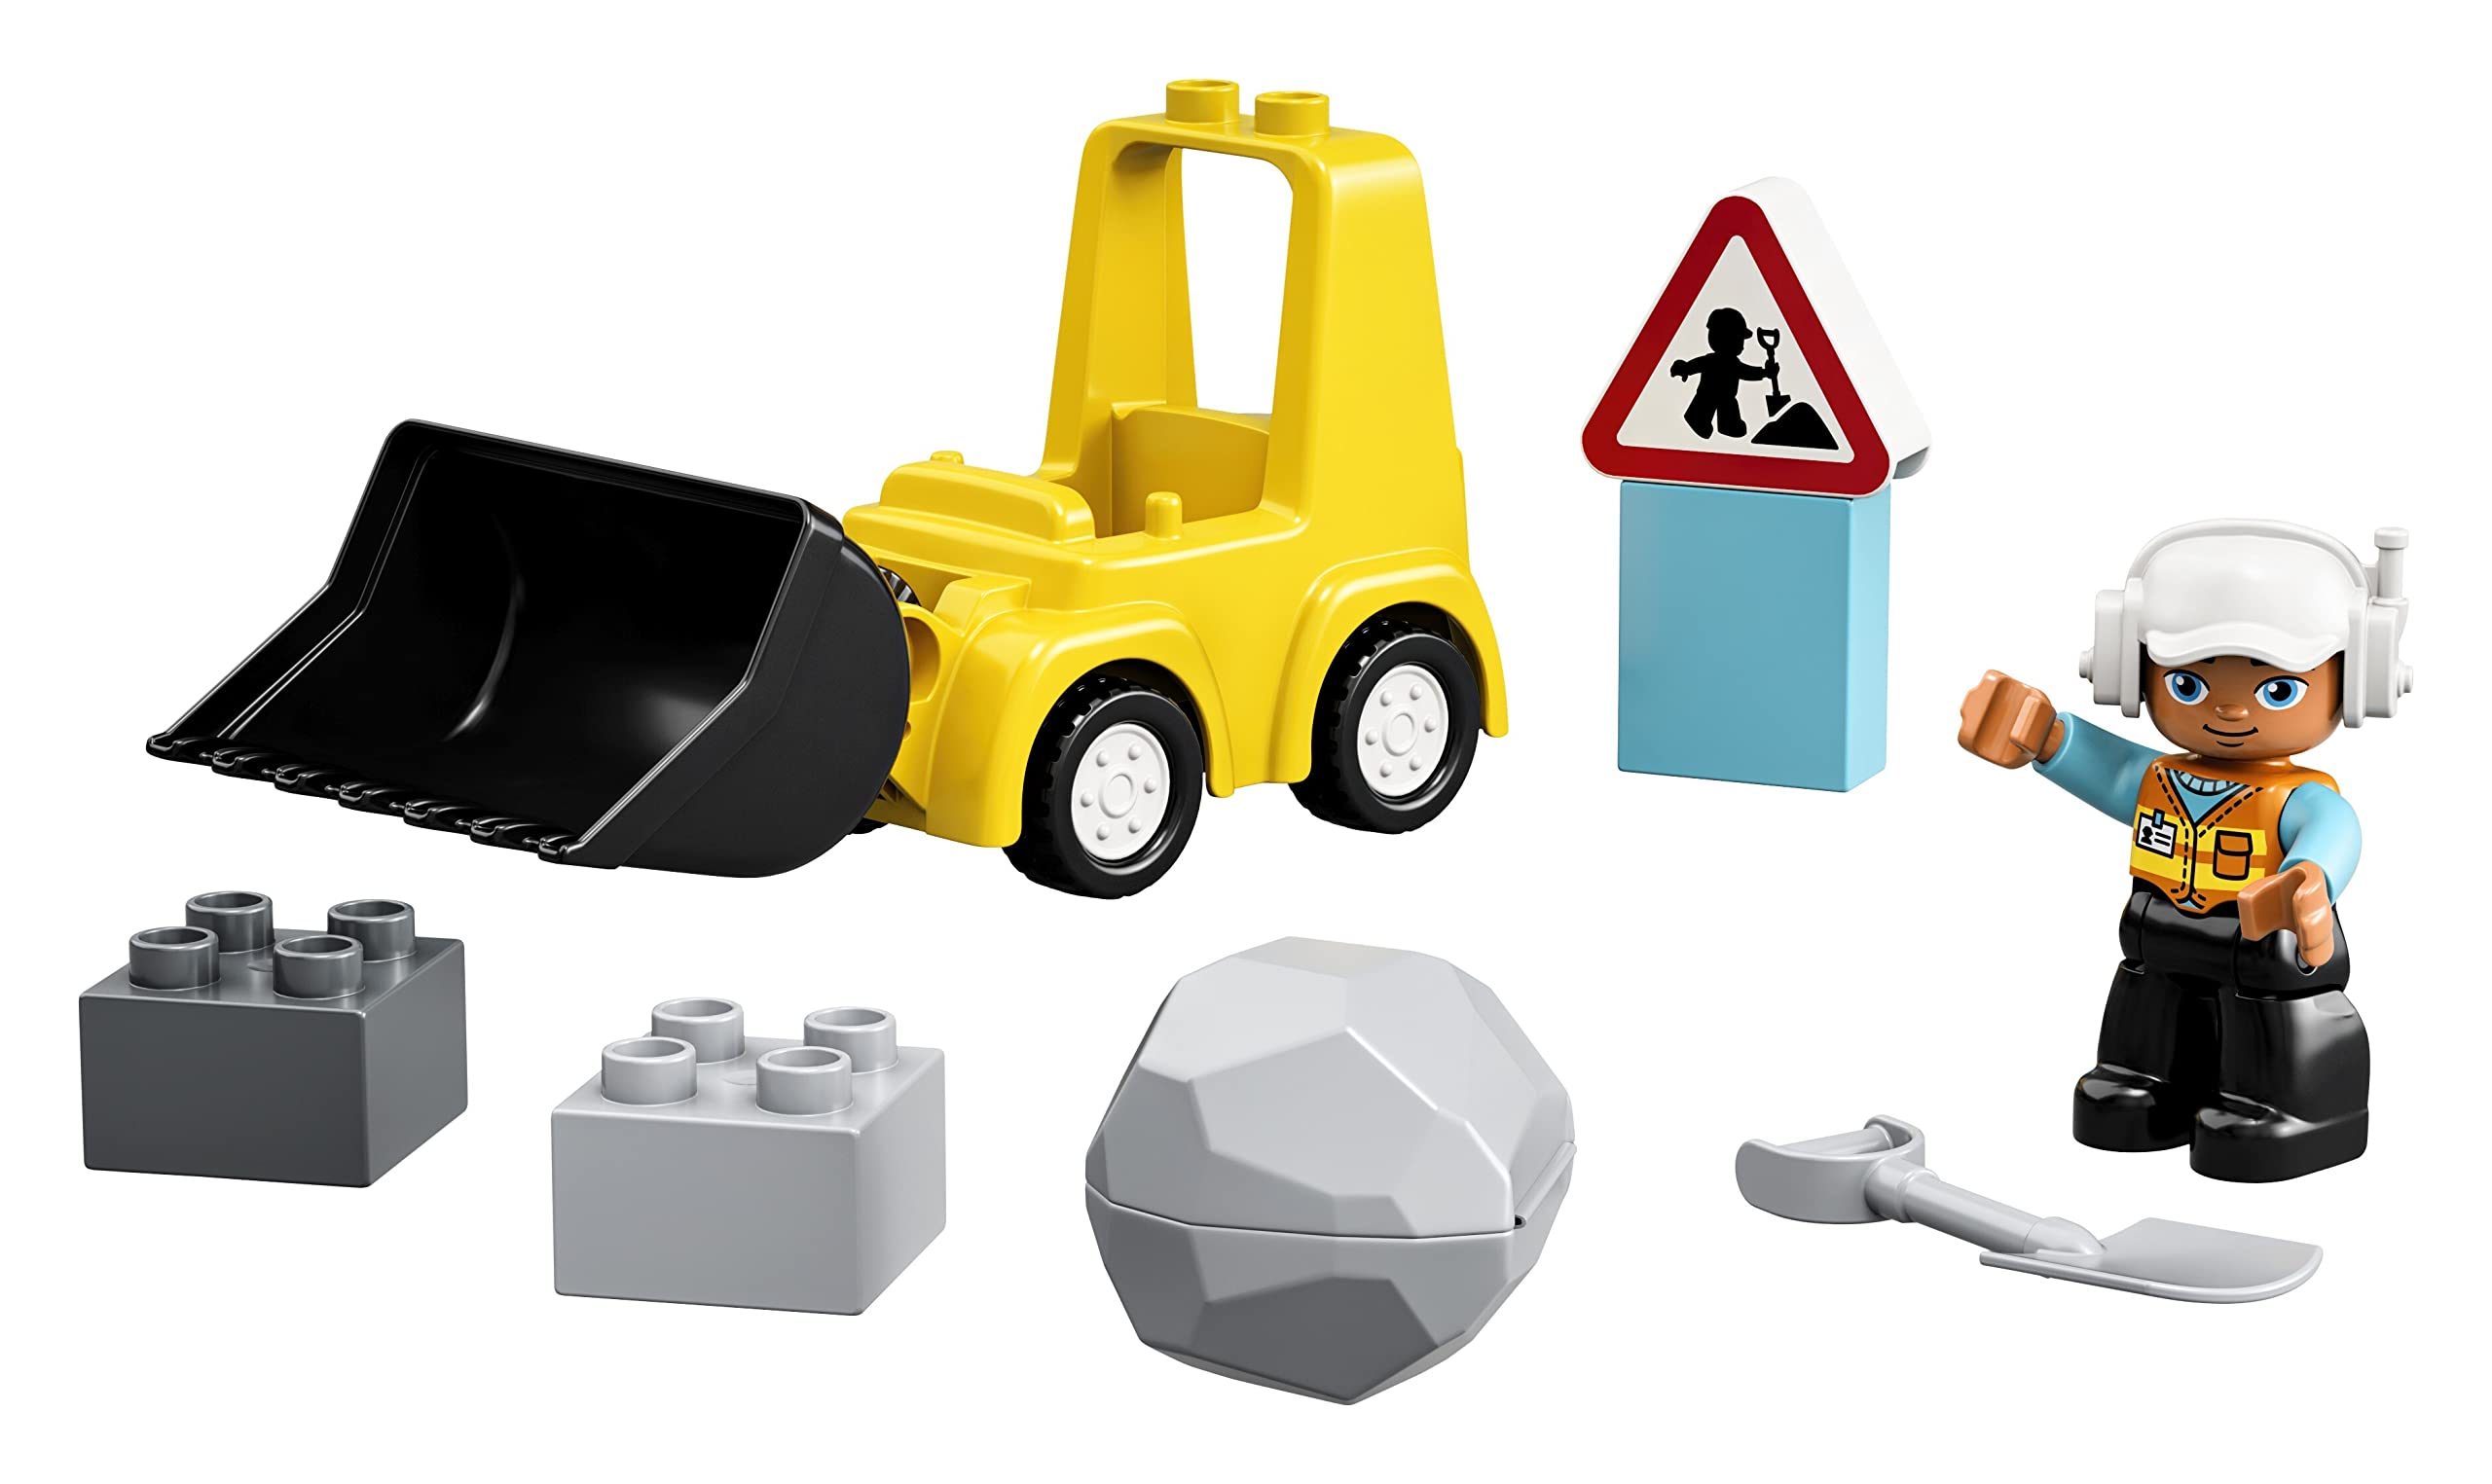 Lego Duplo Set of 3: 10990 Construction Site with Construction Vehicles, 10931 Excavator and Truck & 10930 Wheel Loader